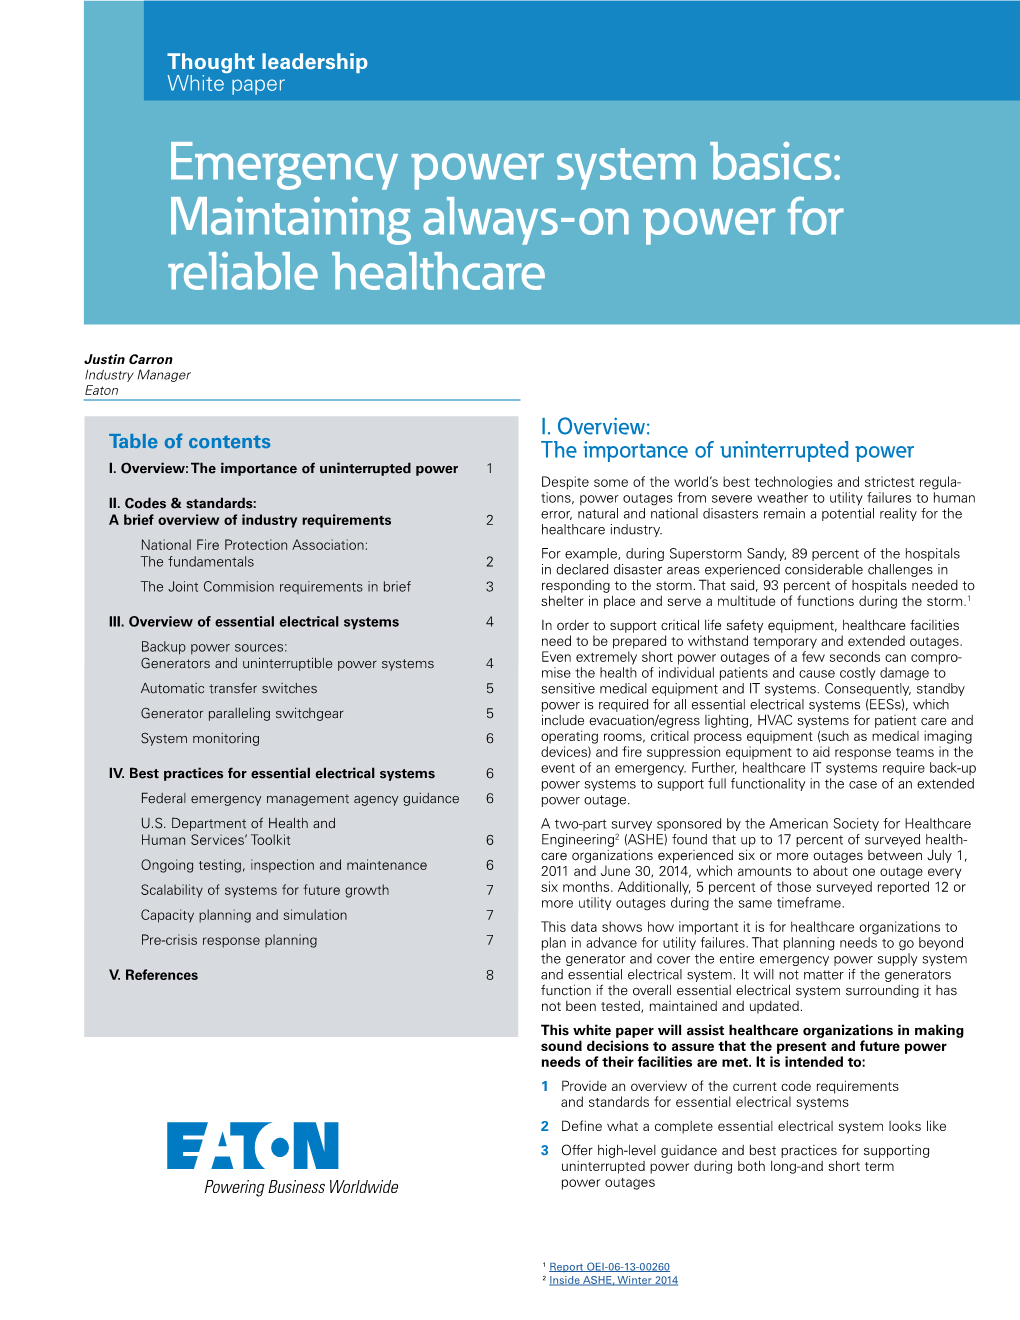 Emergency Power System Basics: Maintaining Always-On Power for Reliable Healthcare